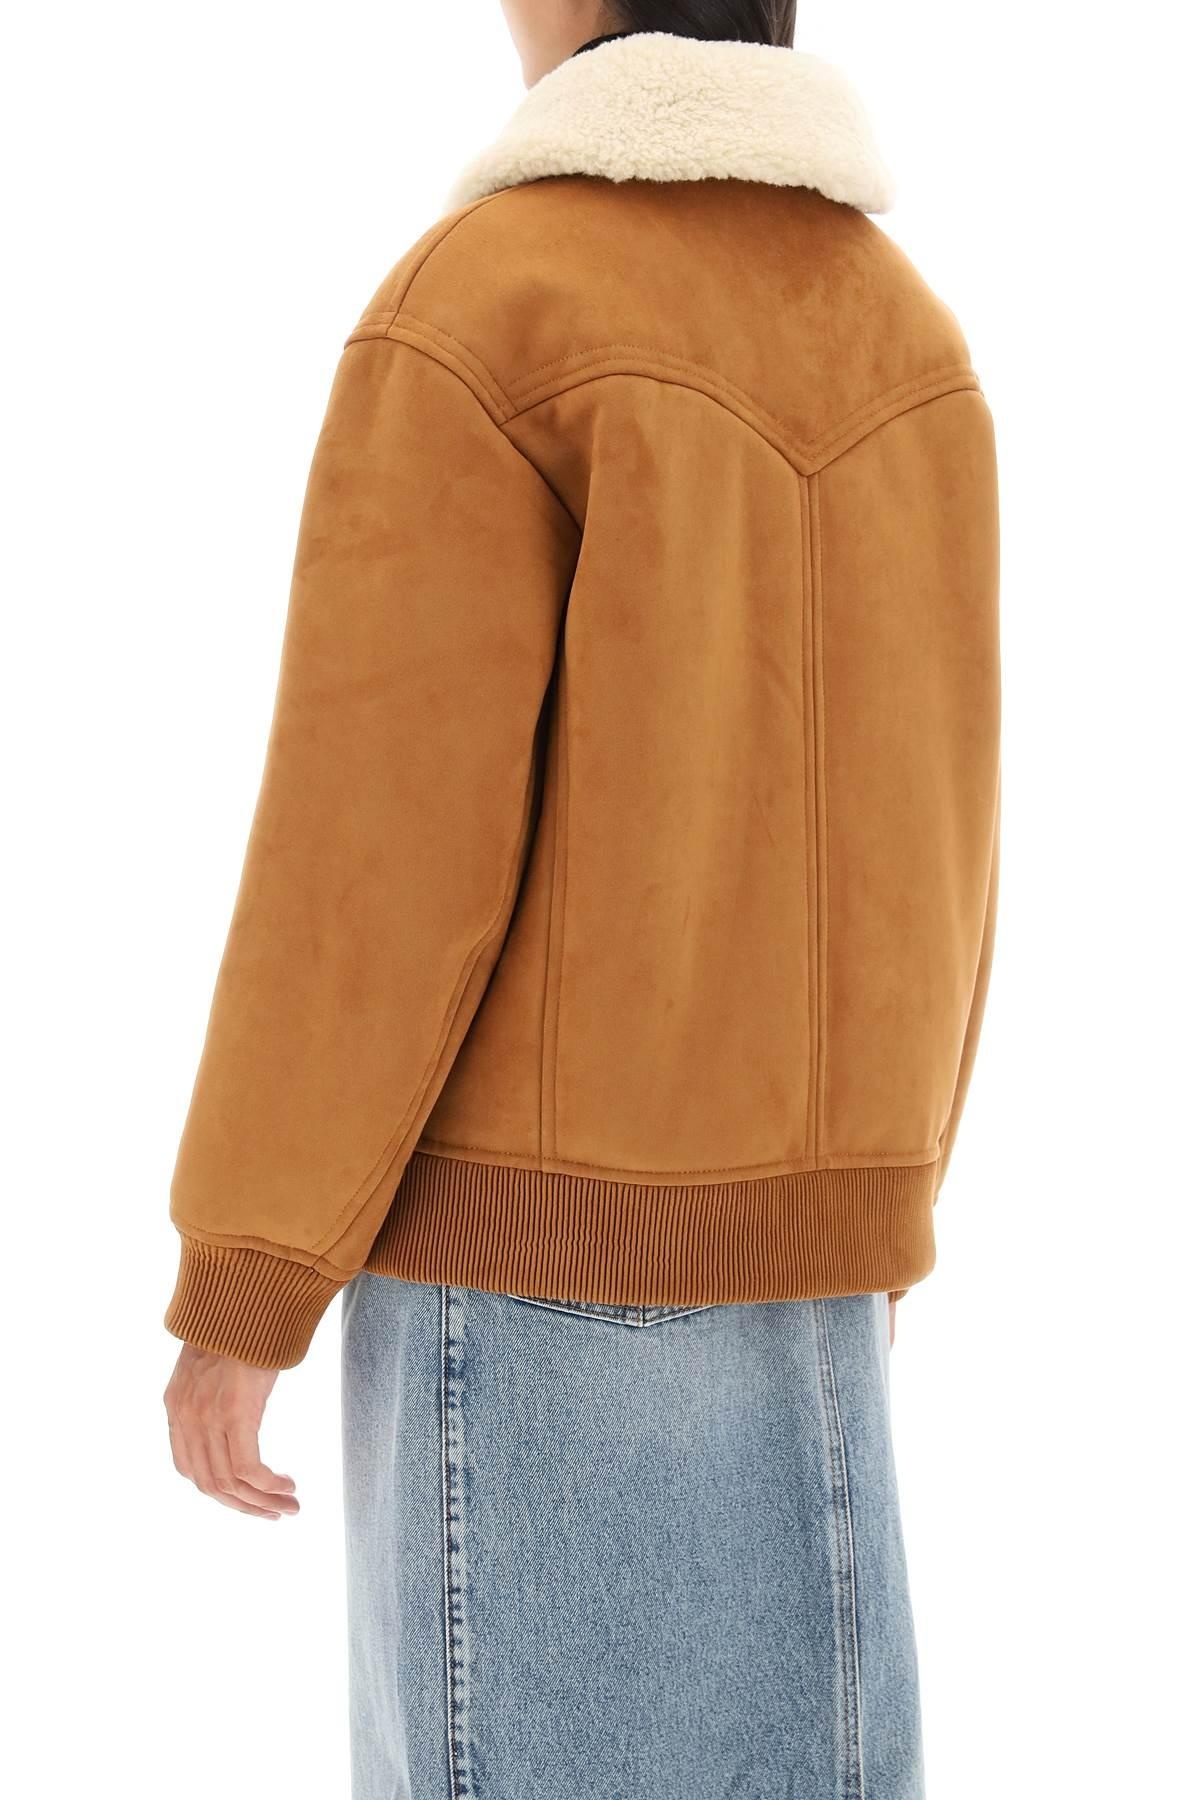 Stand Studio Lillee Eco Shearling Bomber Jacket - 4